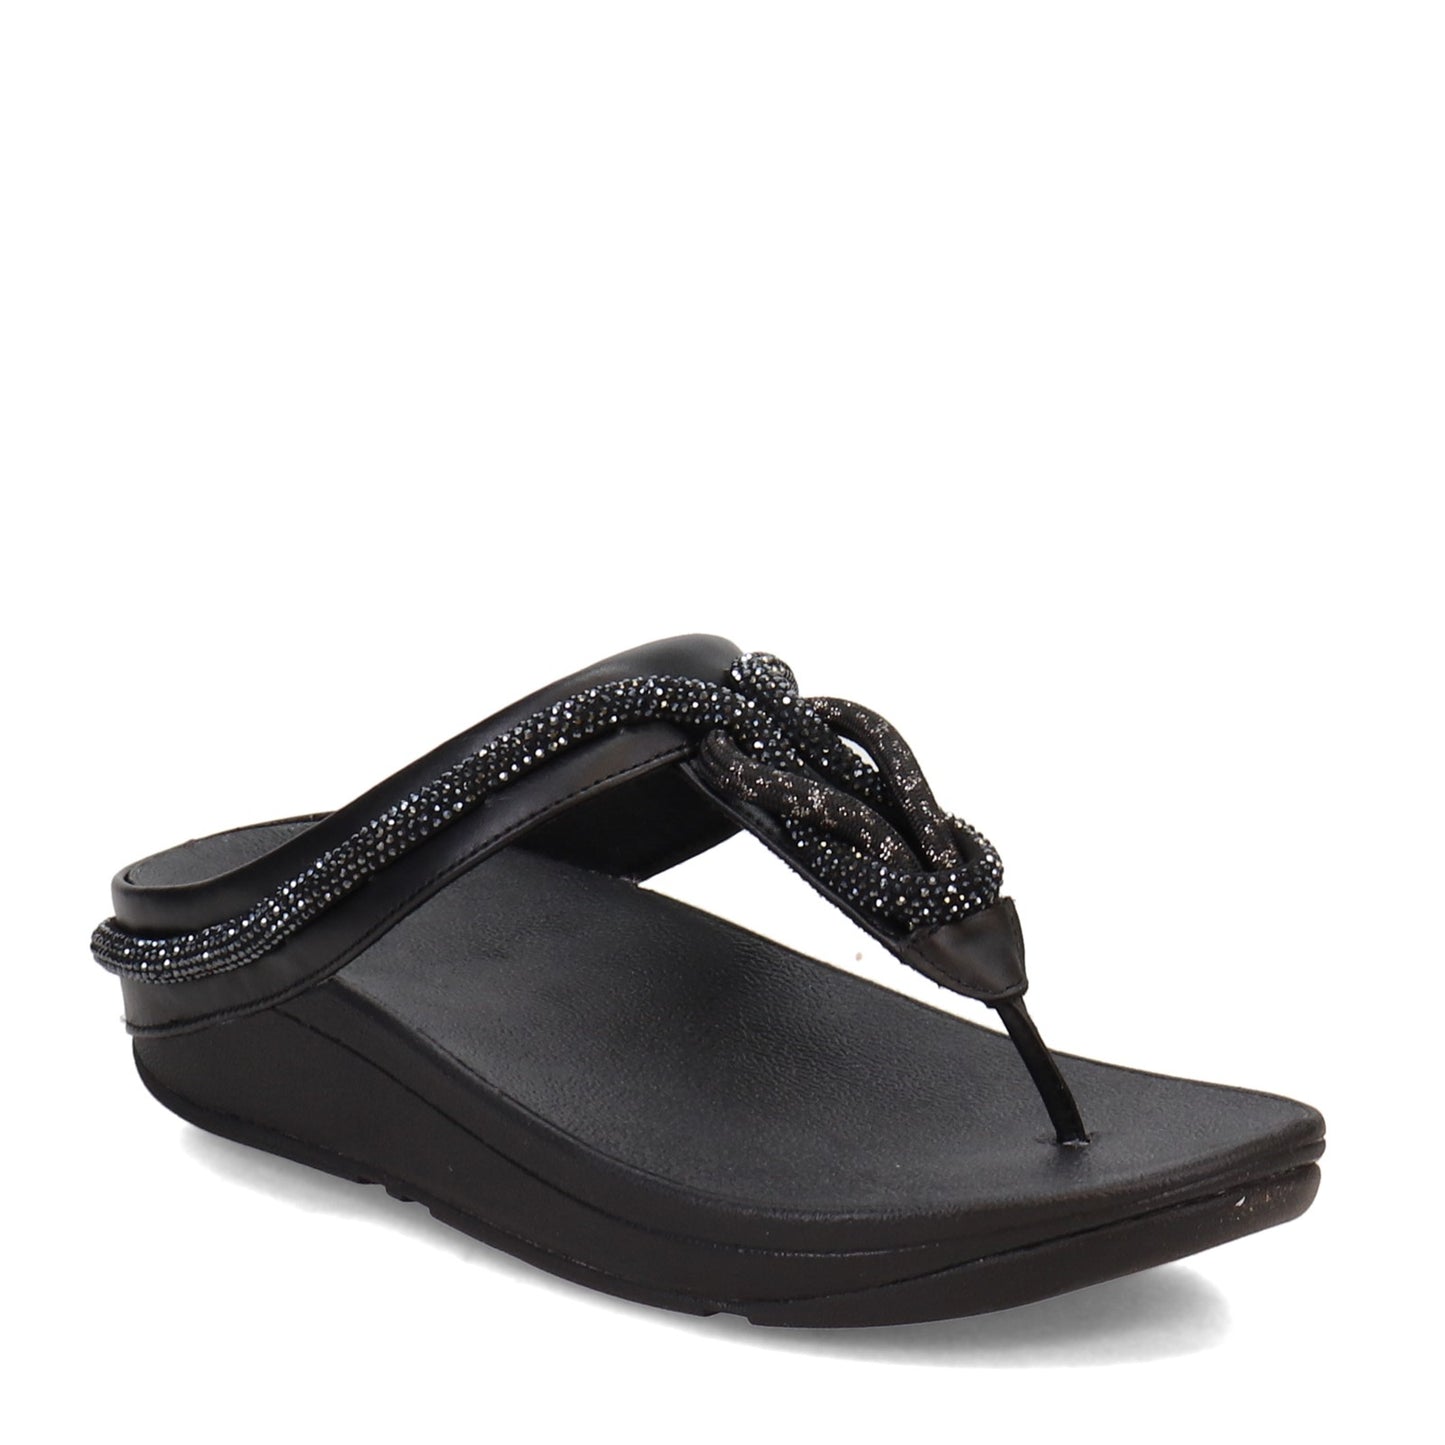 FITFLOP FINO SANDAL BLACK WITH GEMS